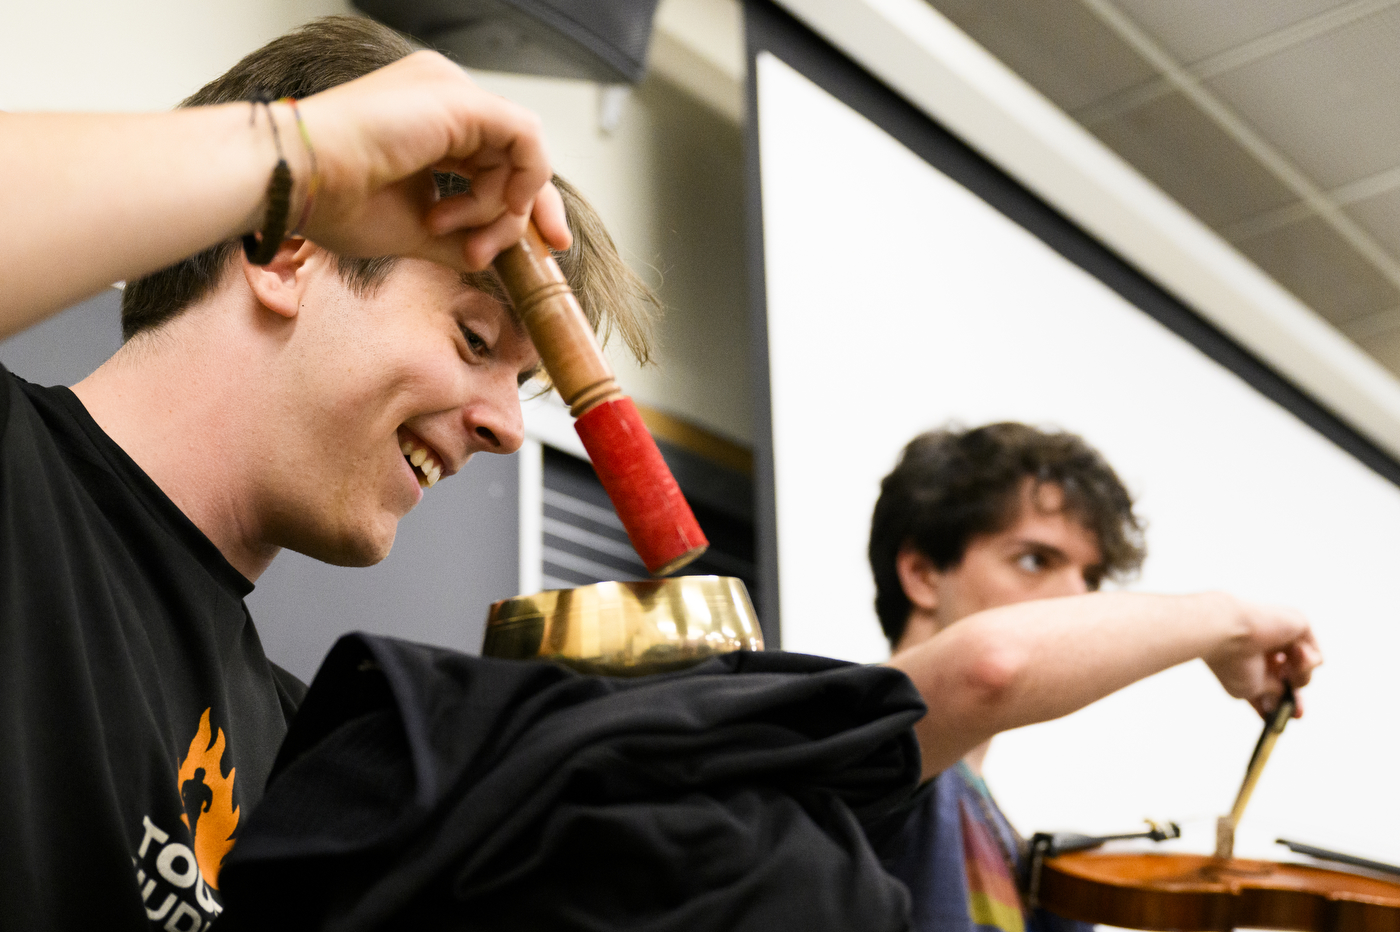 A student smiles while using a historical music technology technique.